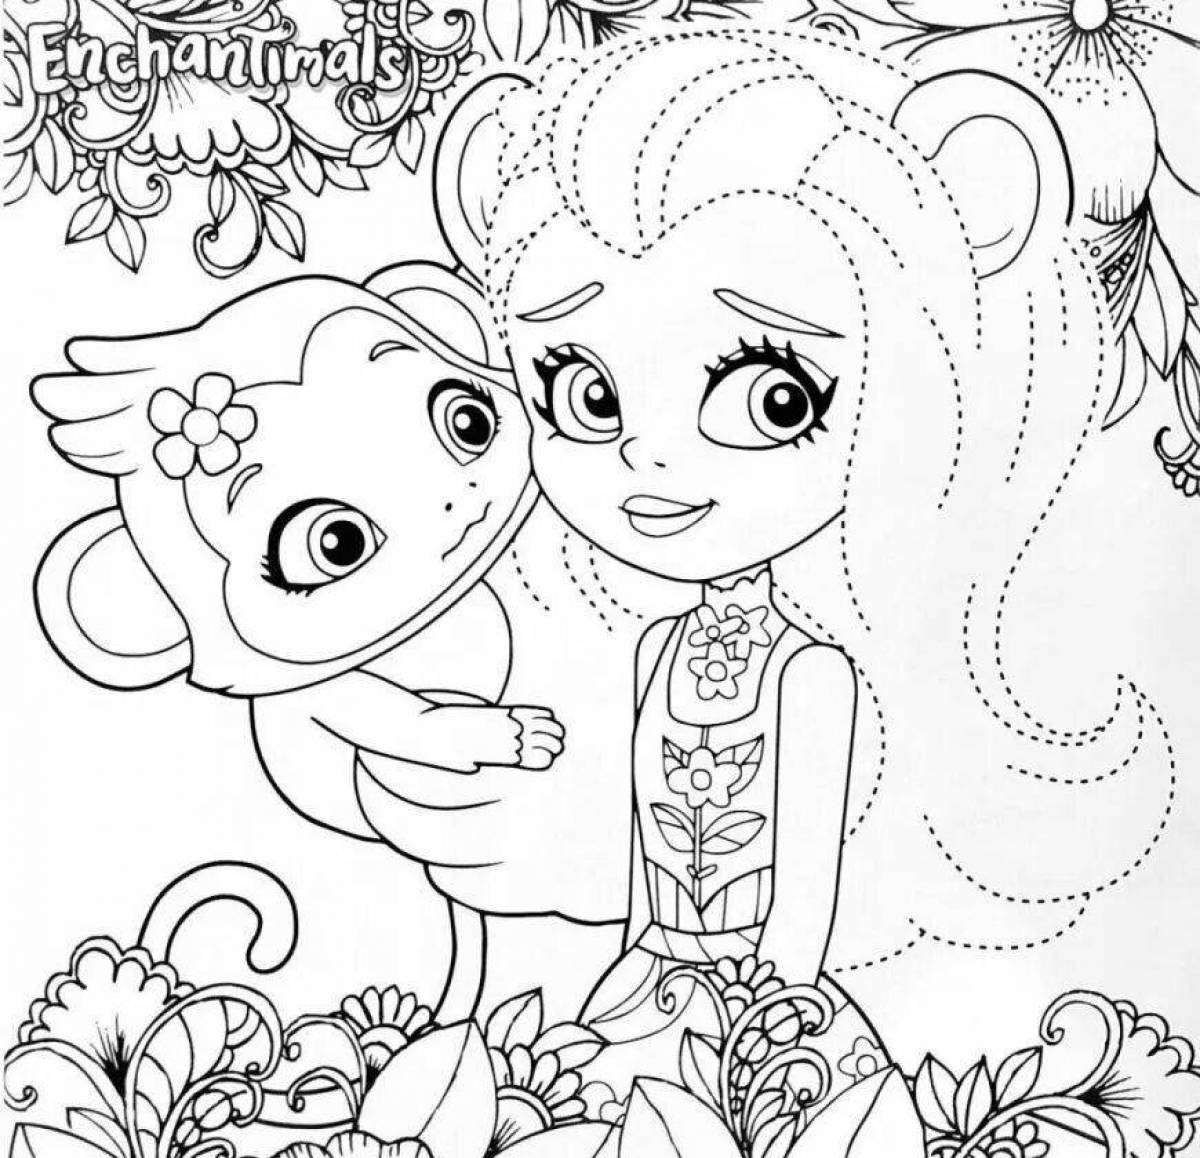 Enchenchimals humorous coloring book